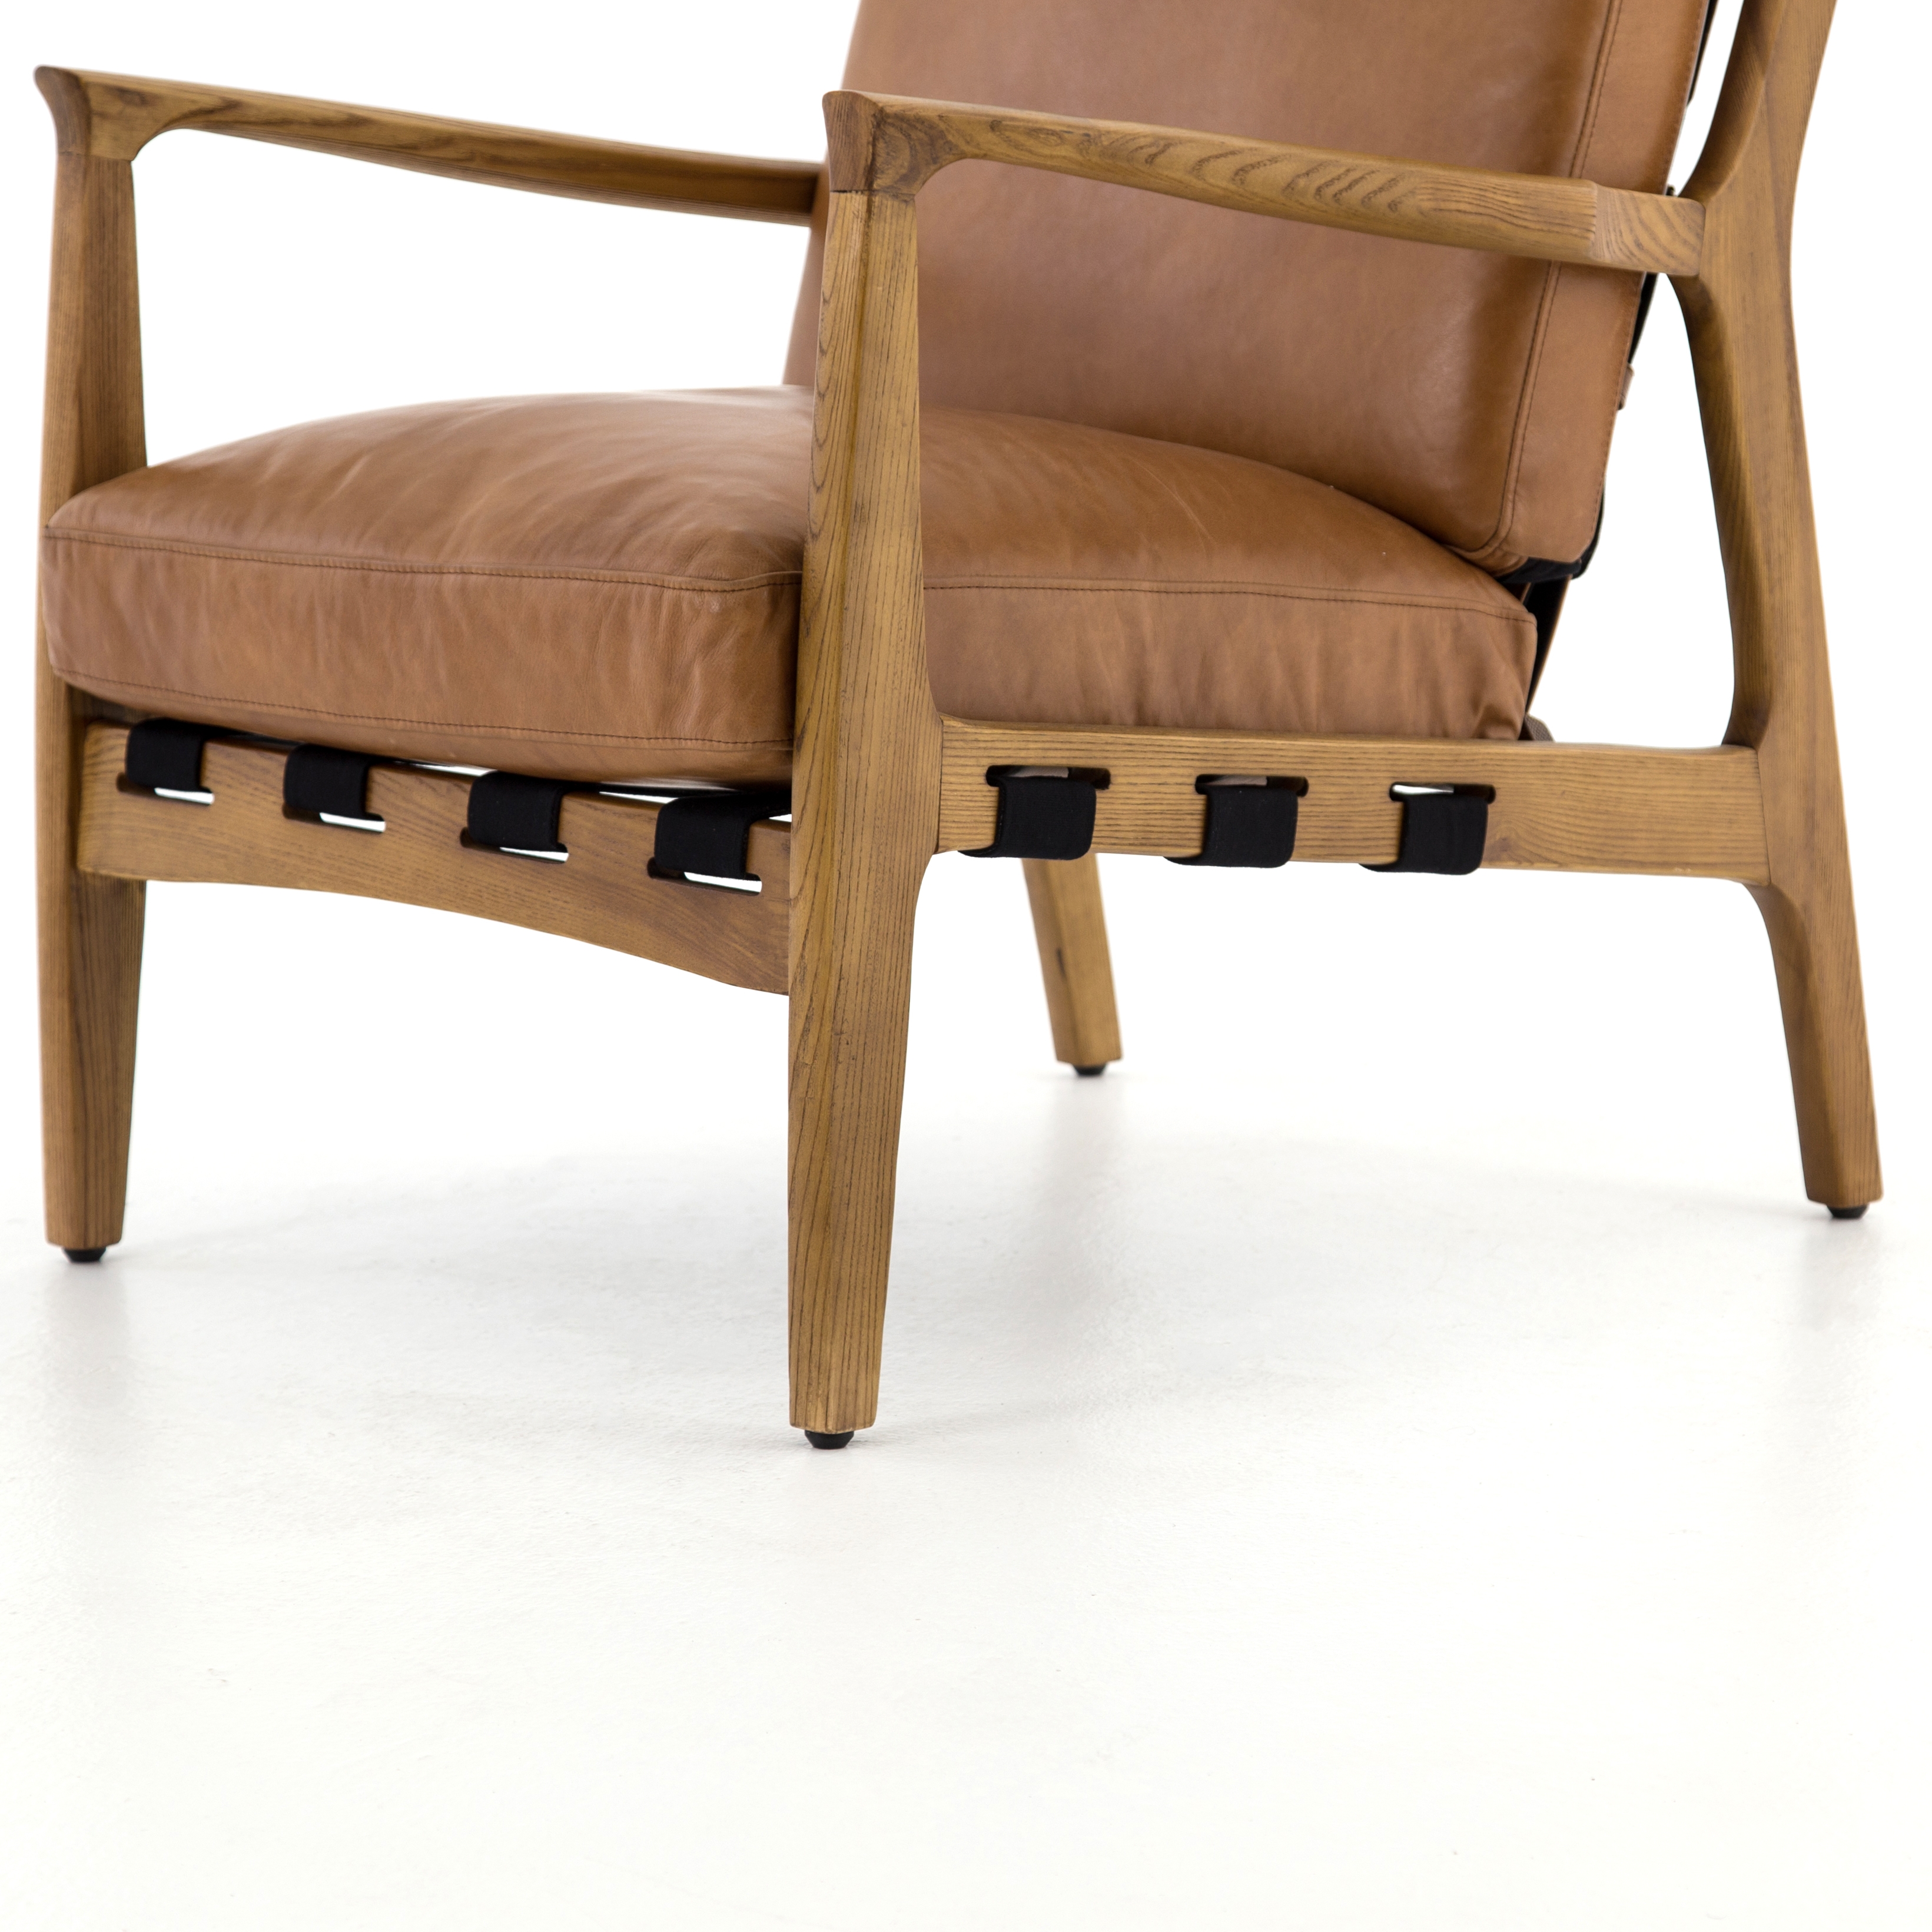 Kenneth Leather Chair - Image 11